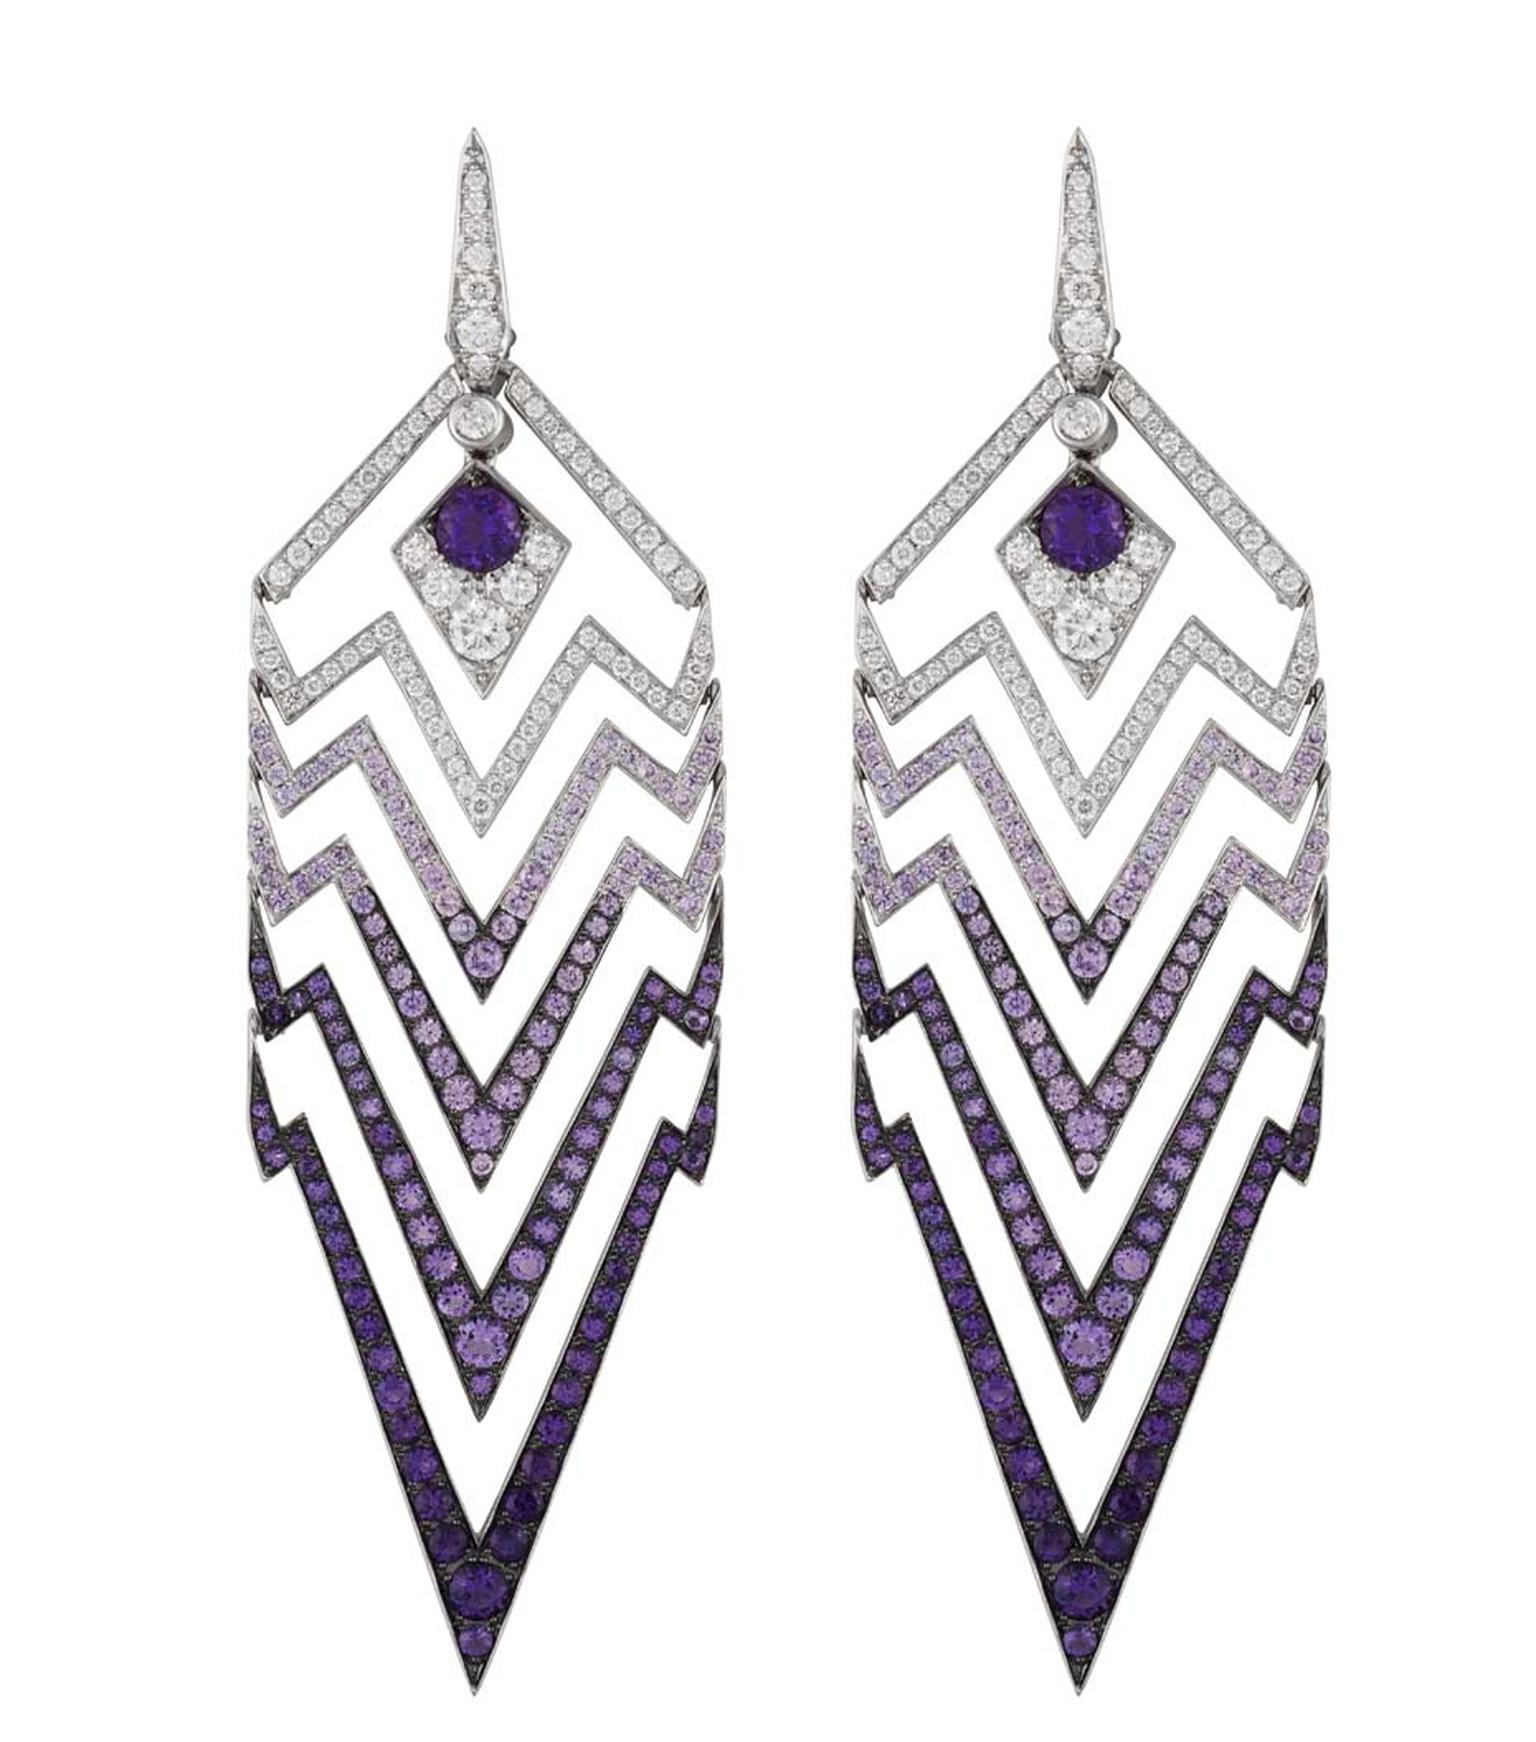 Stephen Webster Lady Stardust white gold earrings with white diamonds and amethysts.